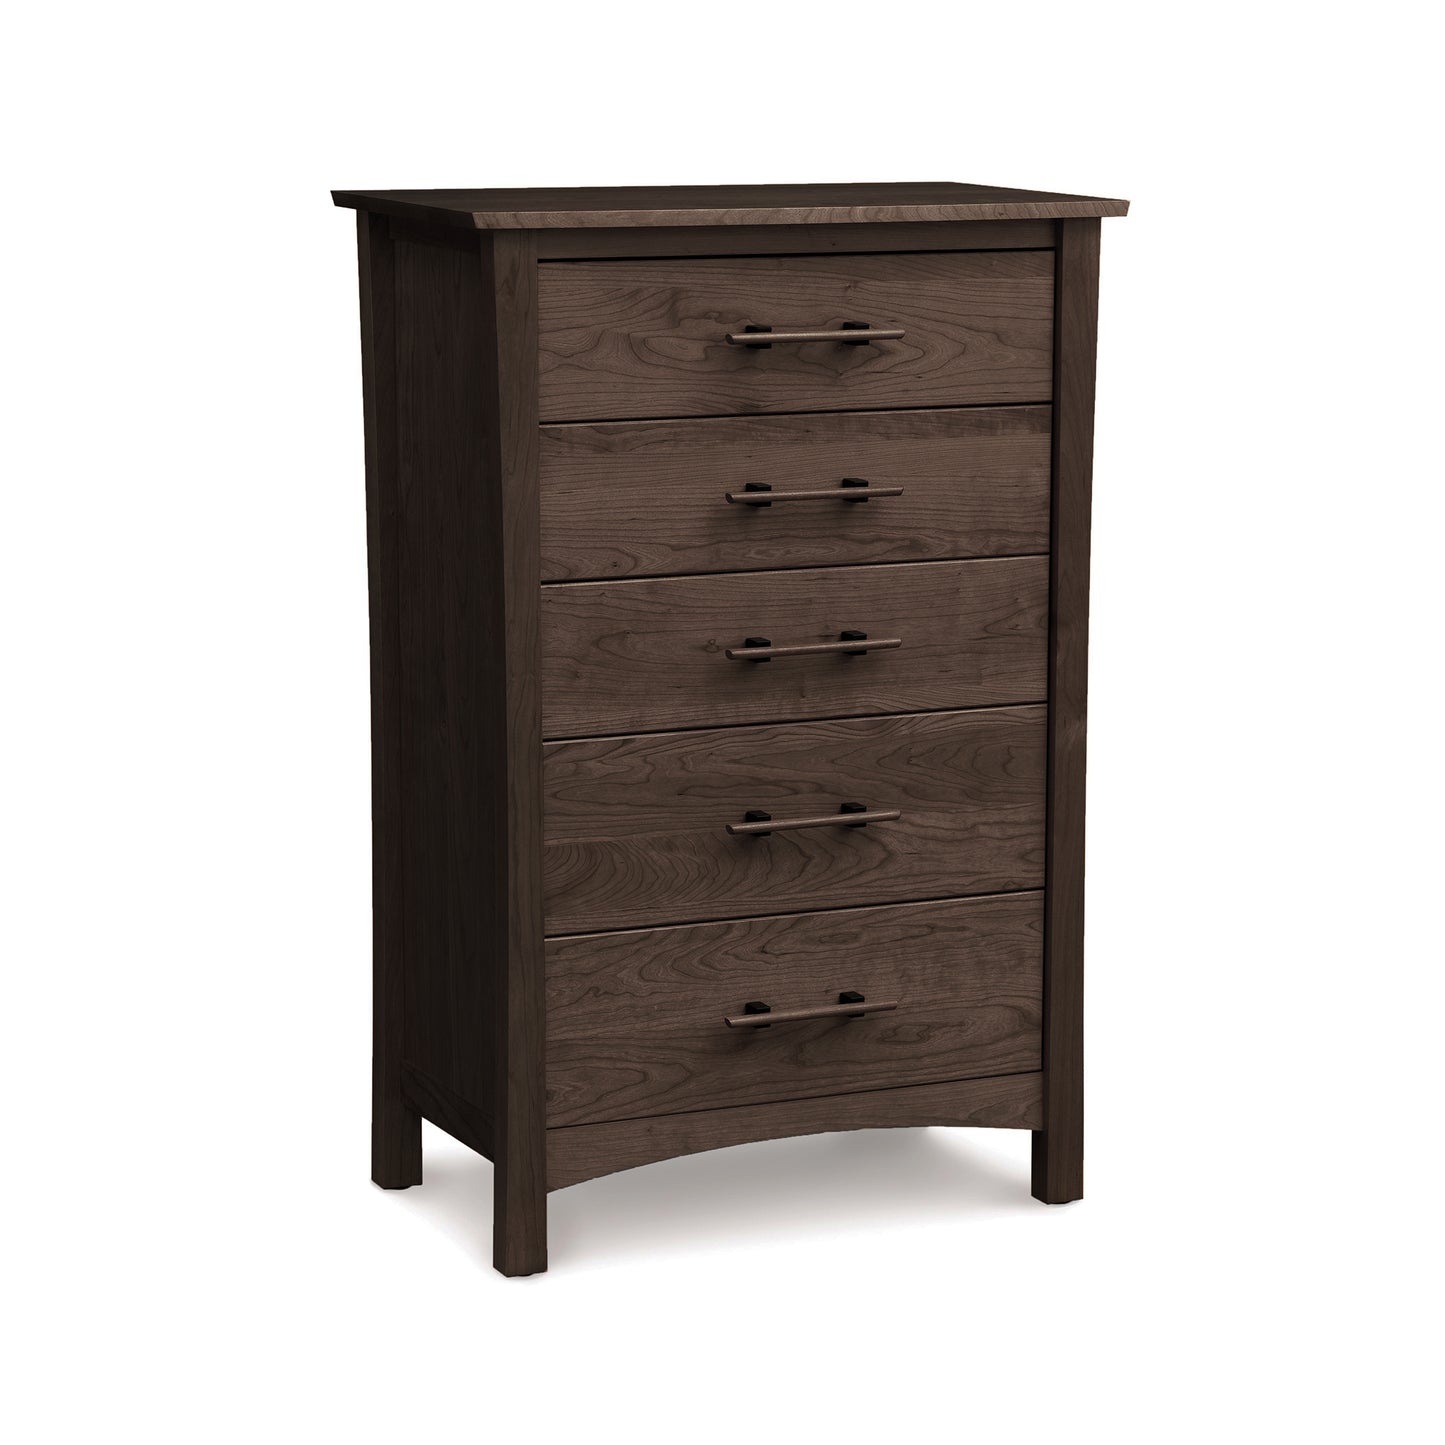 A Monterey 5-Drawer Chest with a dark finish and round metal pulls, isolated on a white background.